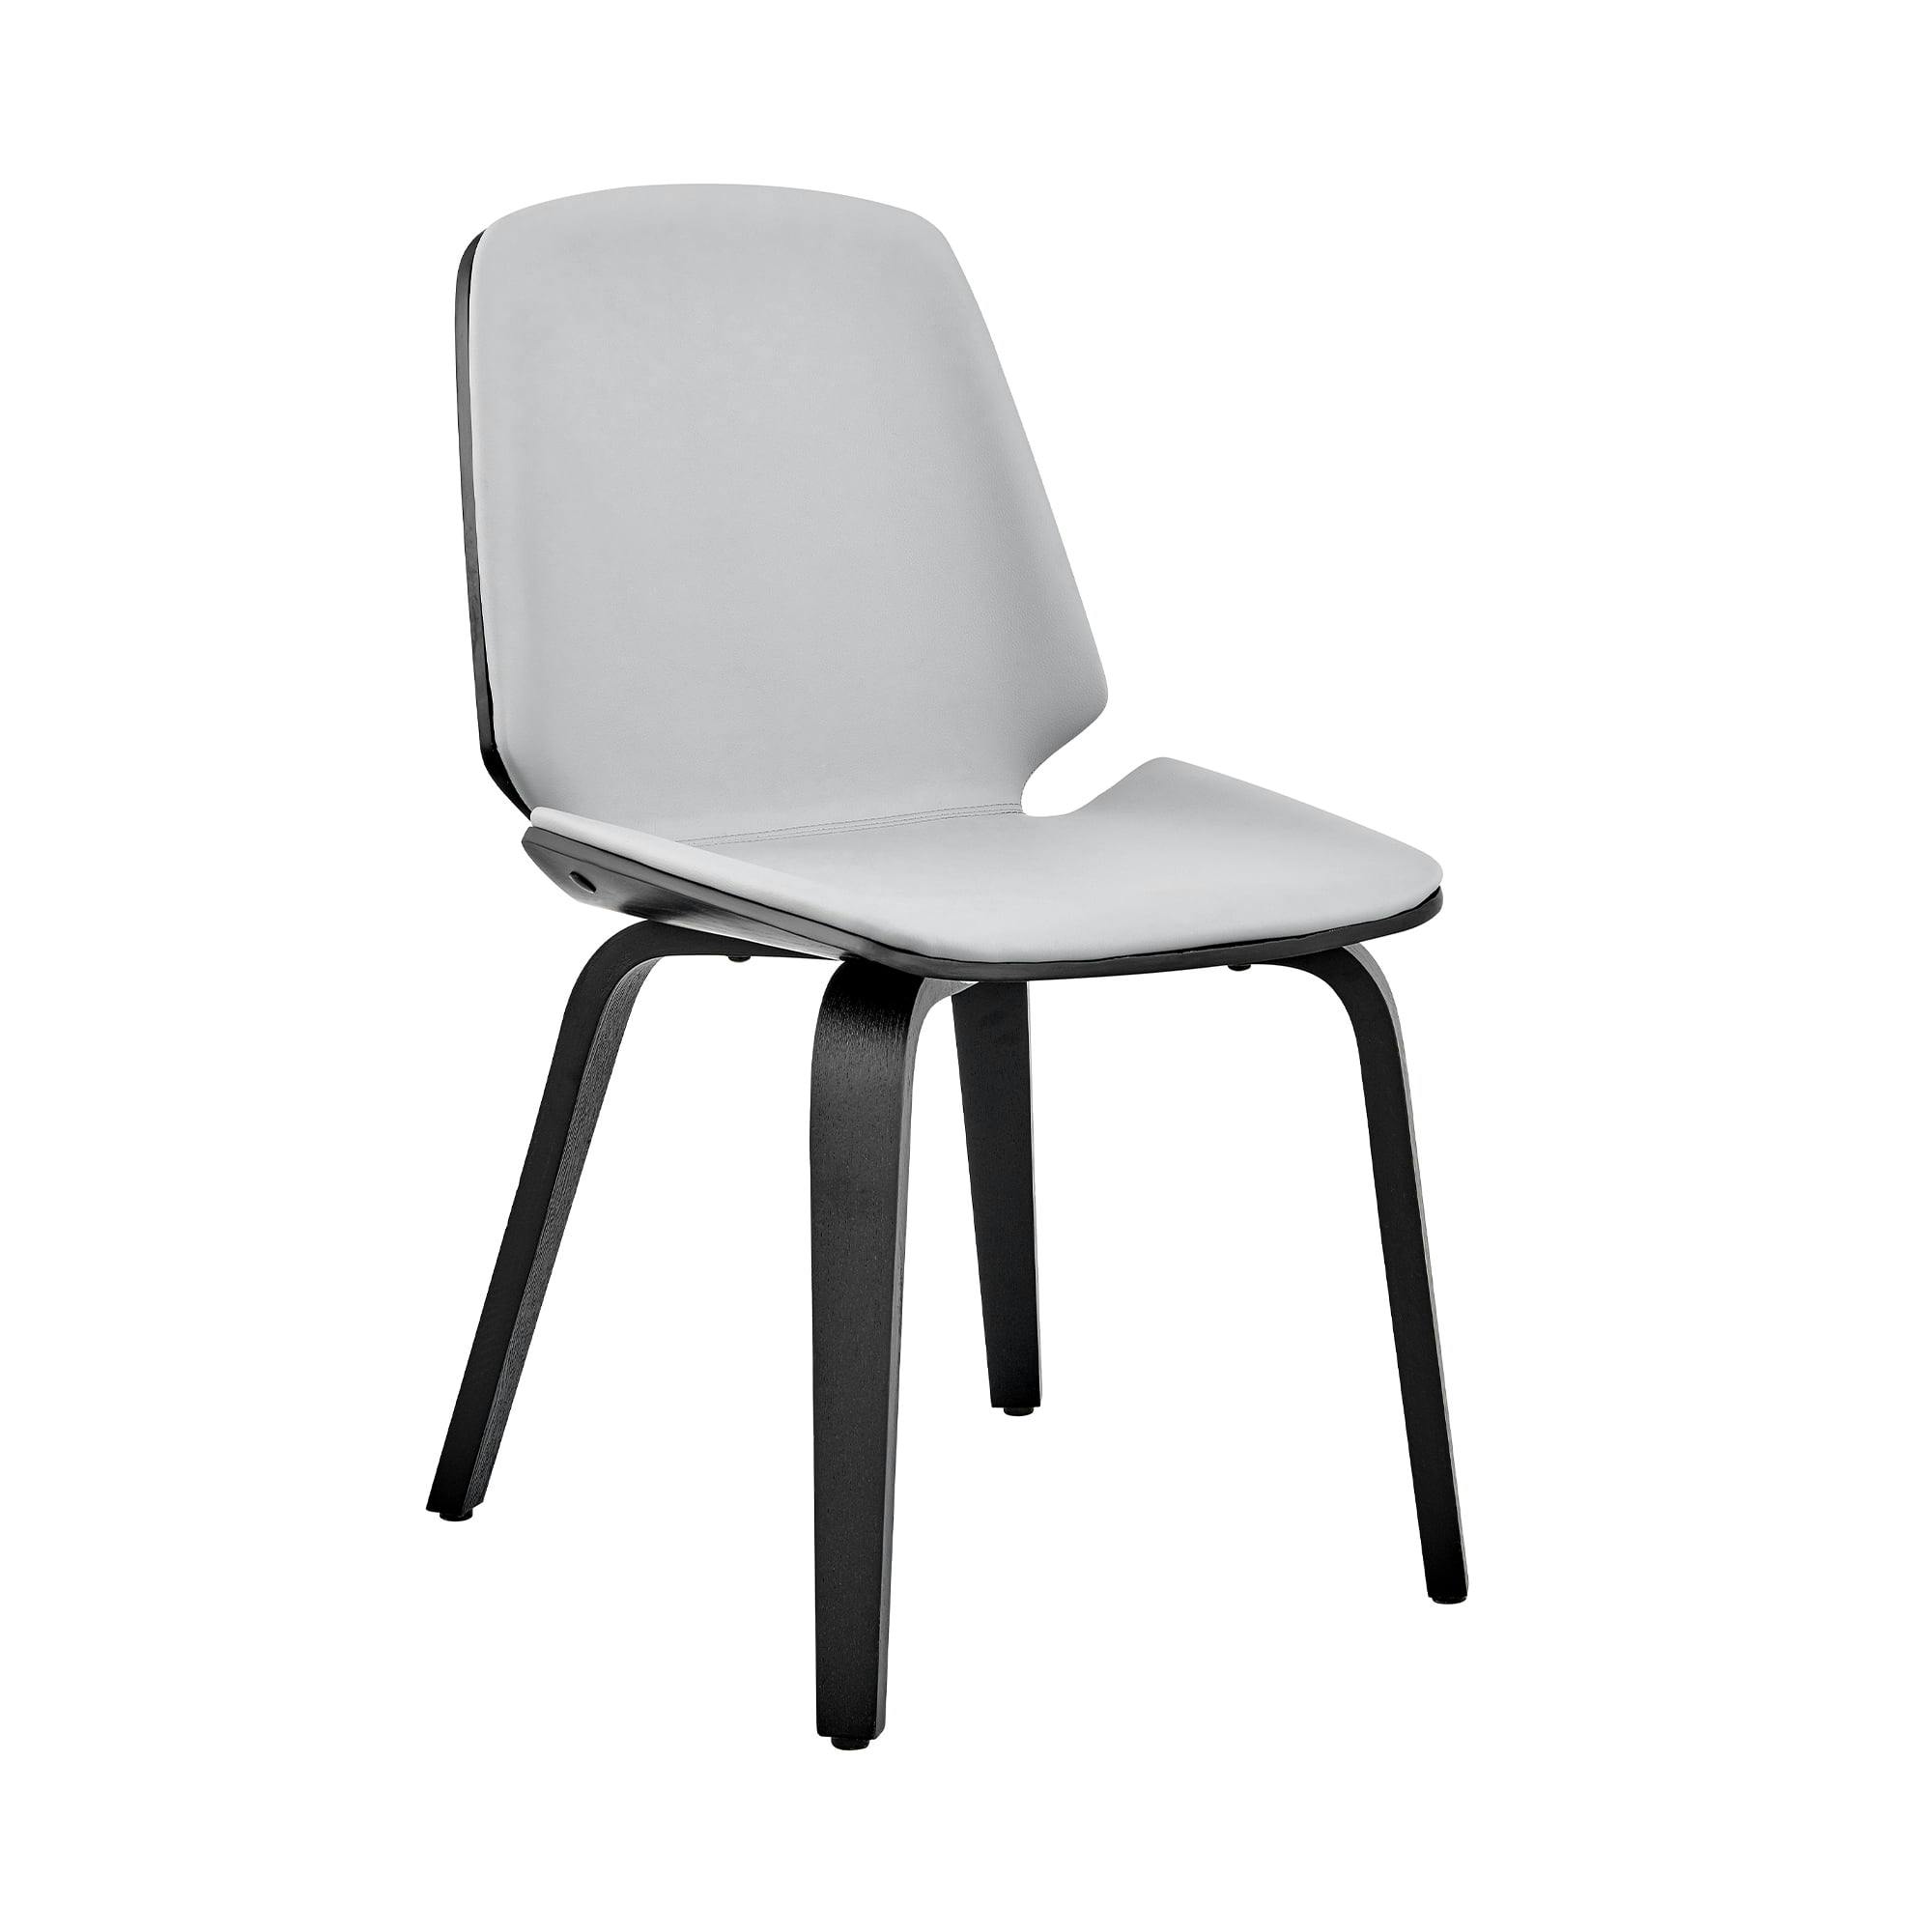 Elevated Gray Faux Leather Side Chair with Black Wooden Legs